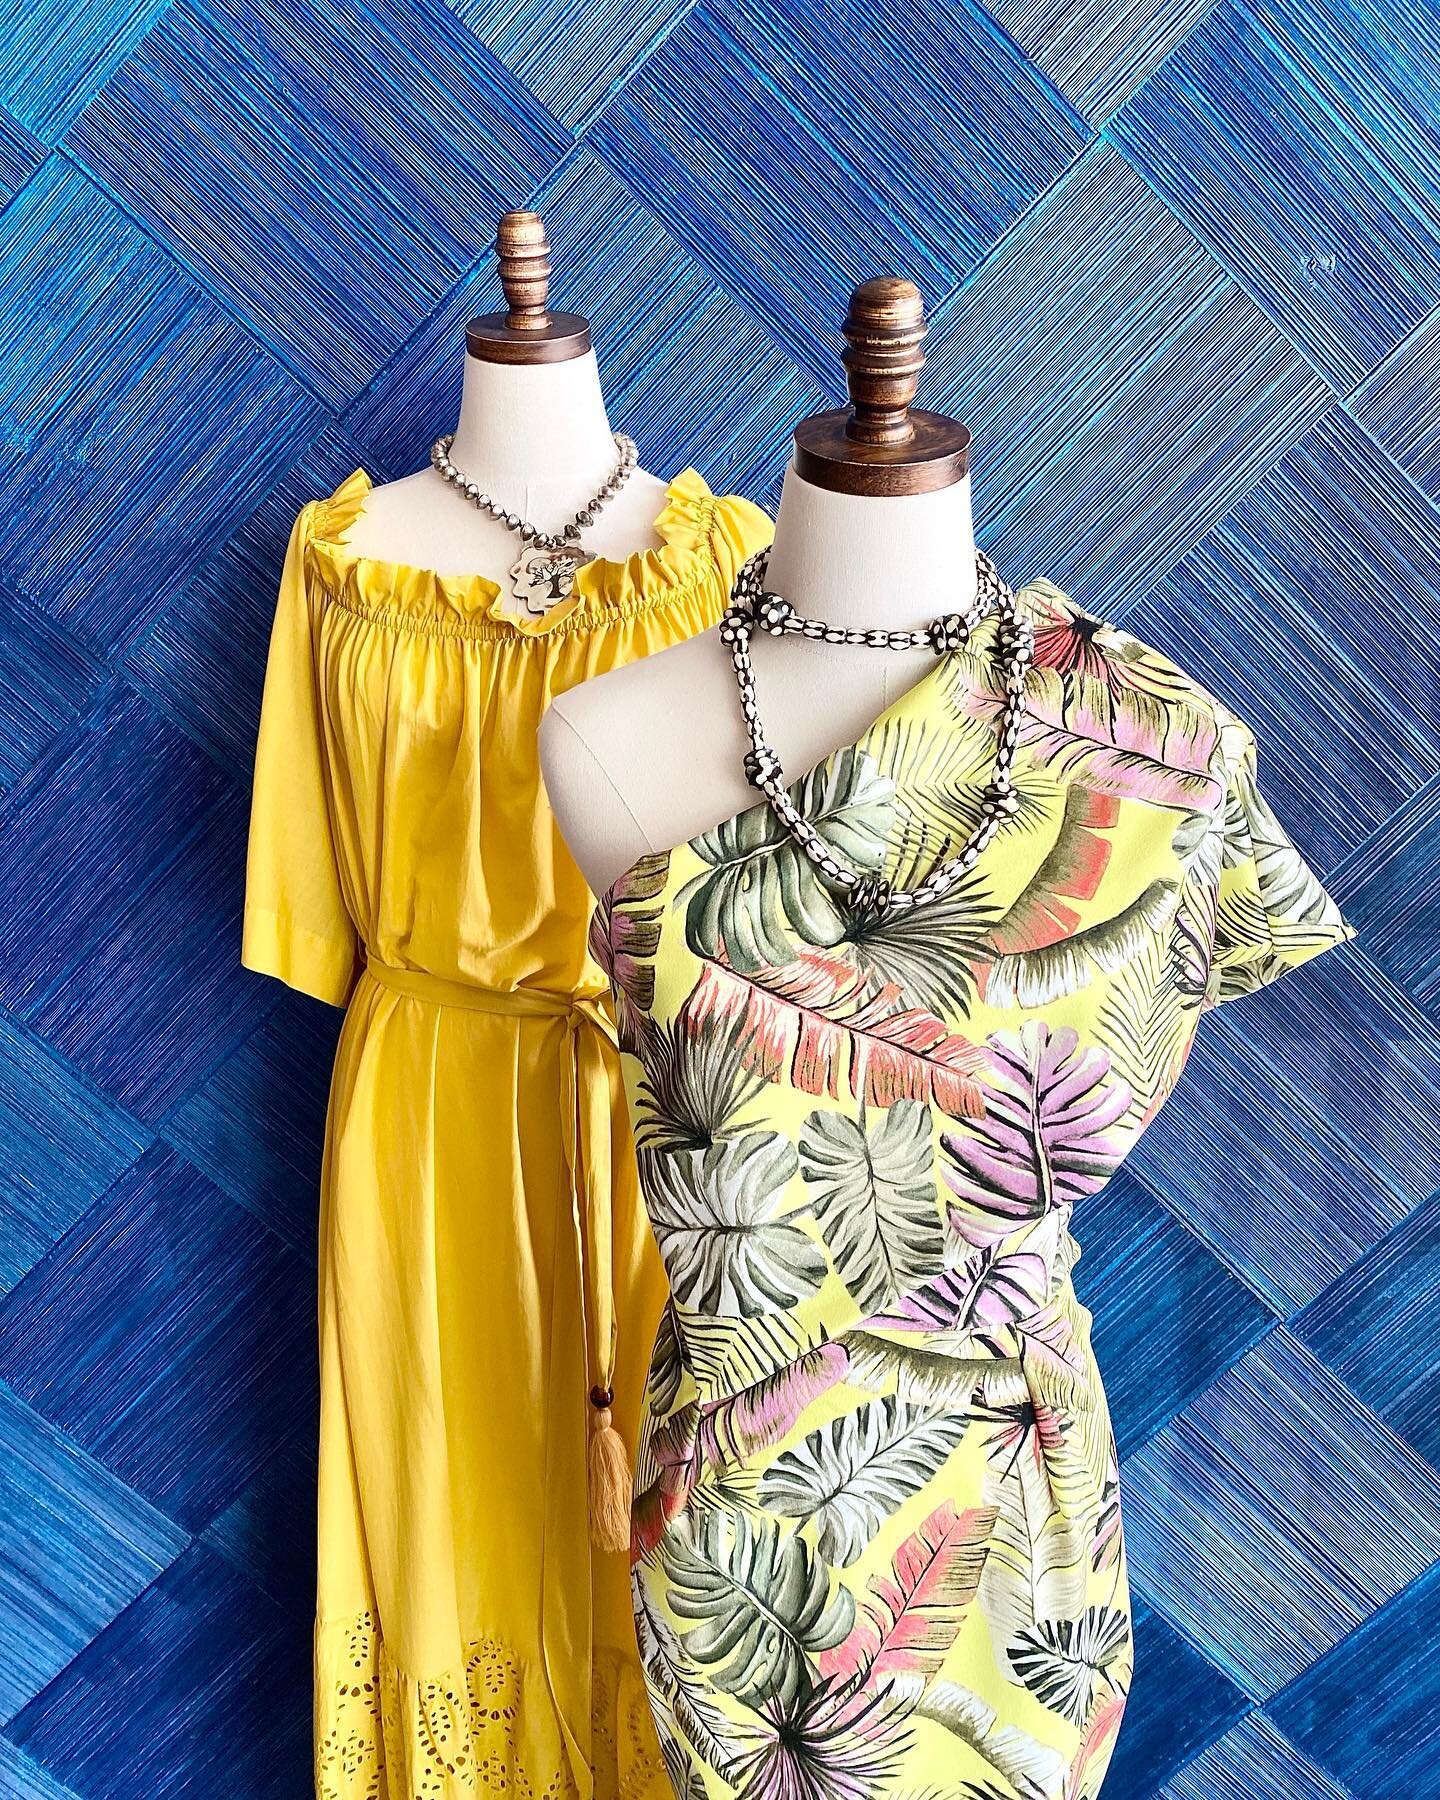 .
✨New dresses 👗have arrived ✨. 
.
Just in time for Easter 🐰☀️🐣!
.
Check out our 2 locations: Georgetown, SC or Mt Pleasant SC. 
.
Open 7 days a week
Sunday 12-5
Monday - Saturday 10-6
.
#wildflowerandwhiskey #wildflowerandwhiskeyclothing #georget